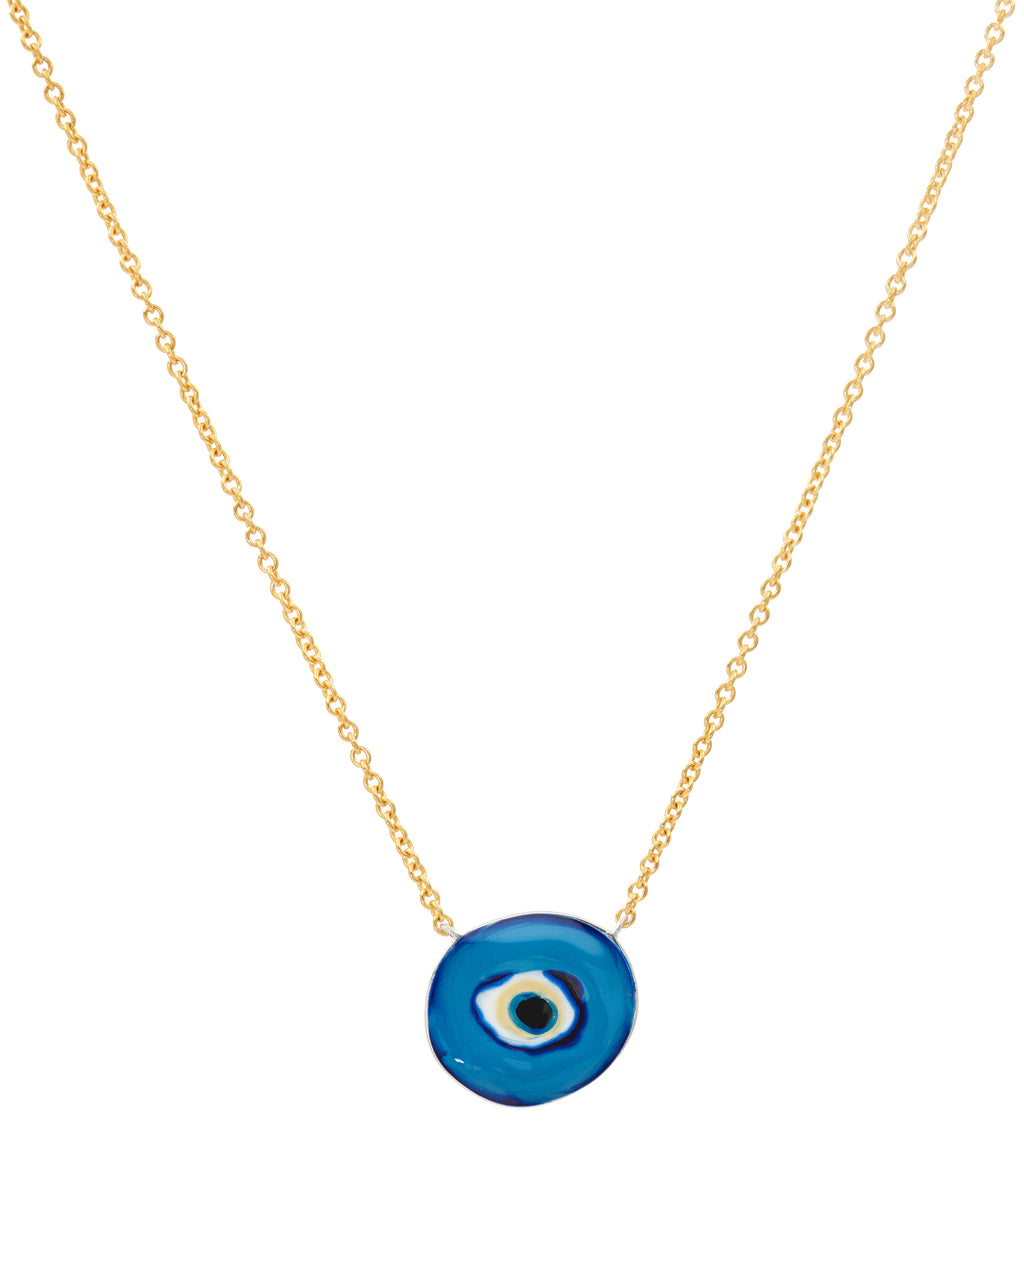 IRINI EVIL EYE, ENAMEL SWIRL OF PROTECTION CLOSE TO YOUR HEART, NECKLACE, GOLD, SILVER, PROTECTION